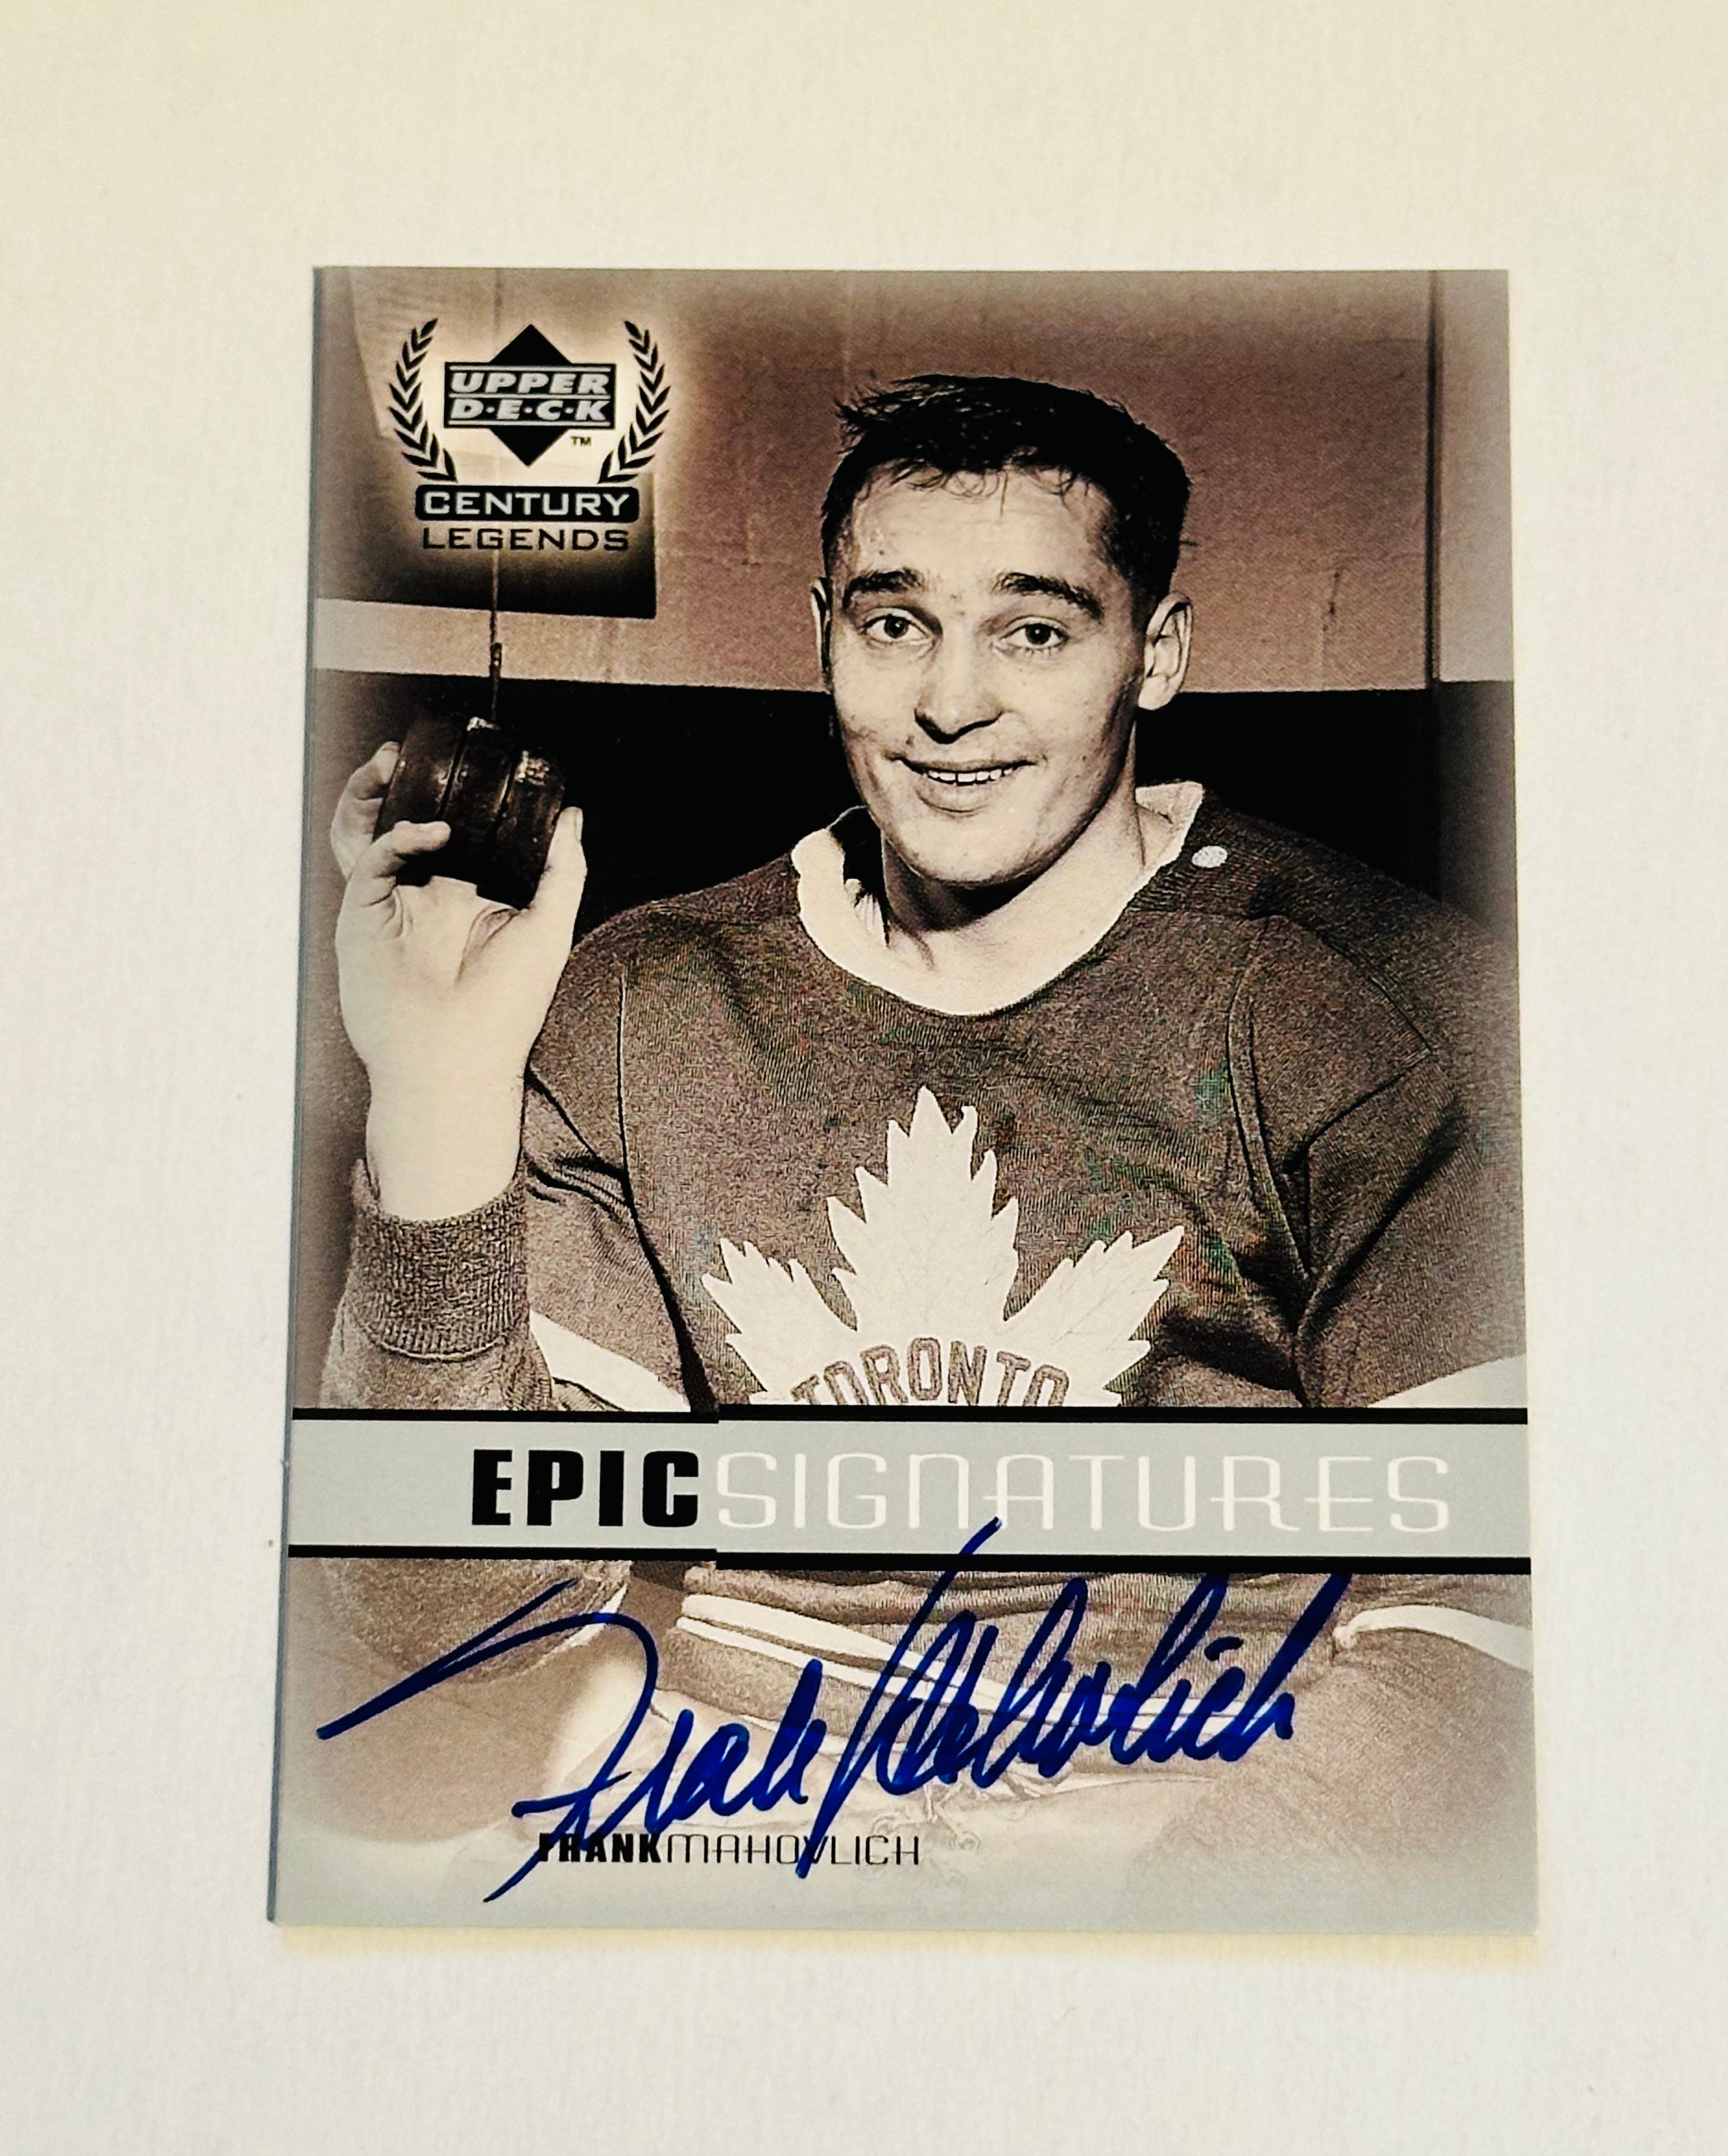 Frank Mahovlich Toronto Maple Leafs epic signitures autograph insert card 1999